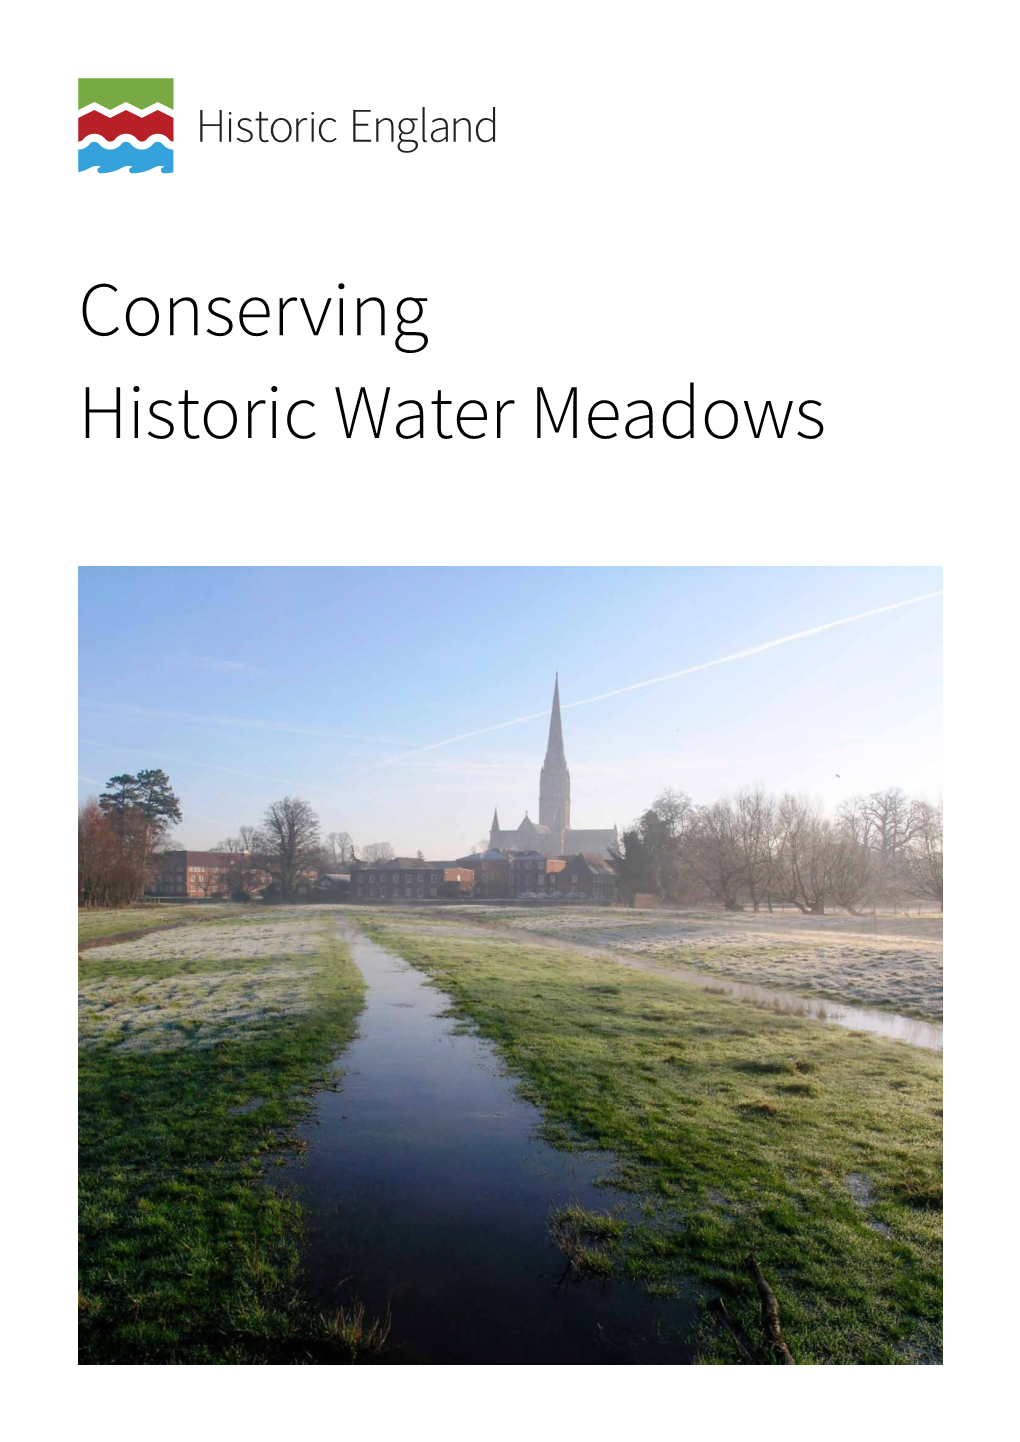 Conserving Historic Water Meadows